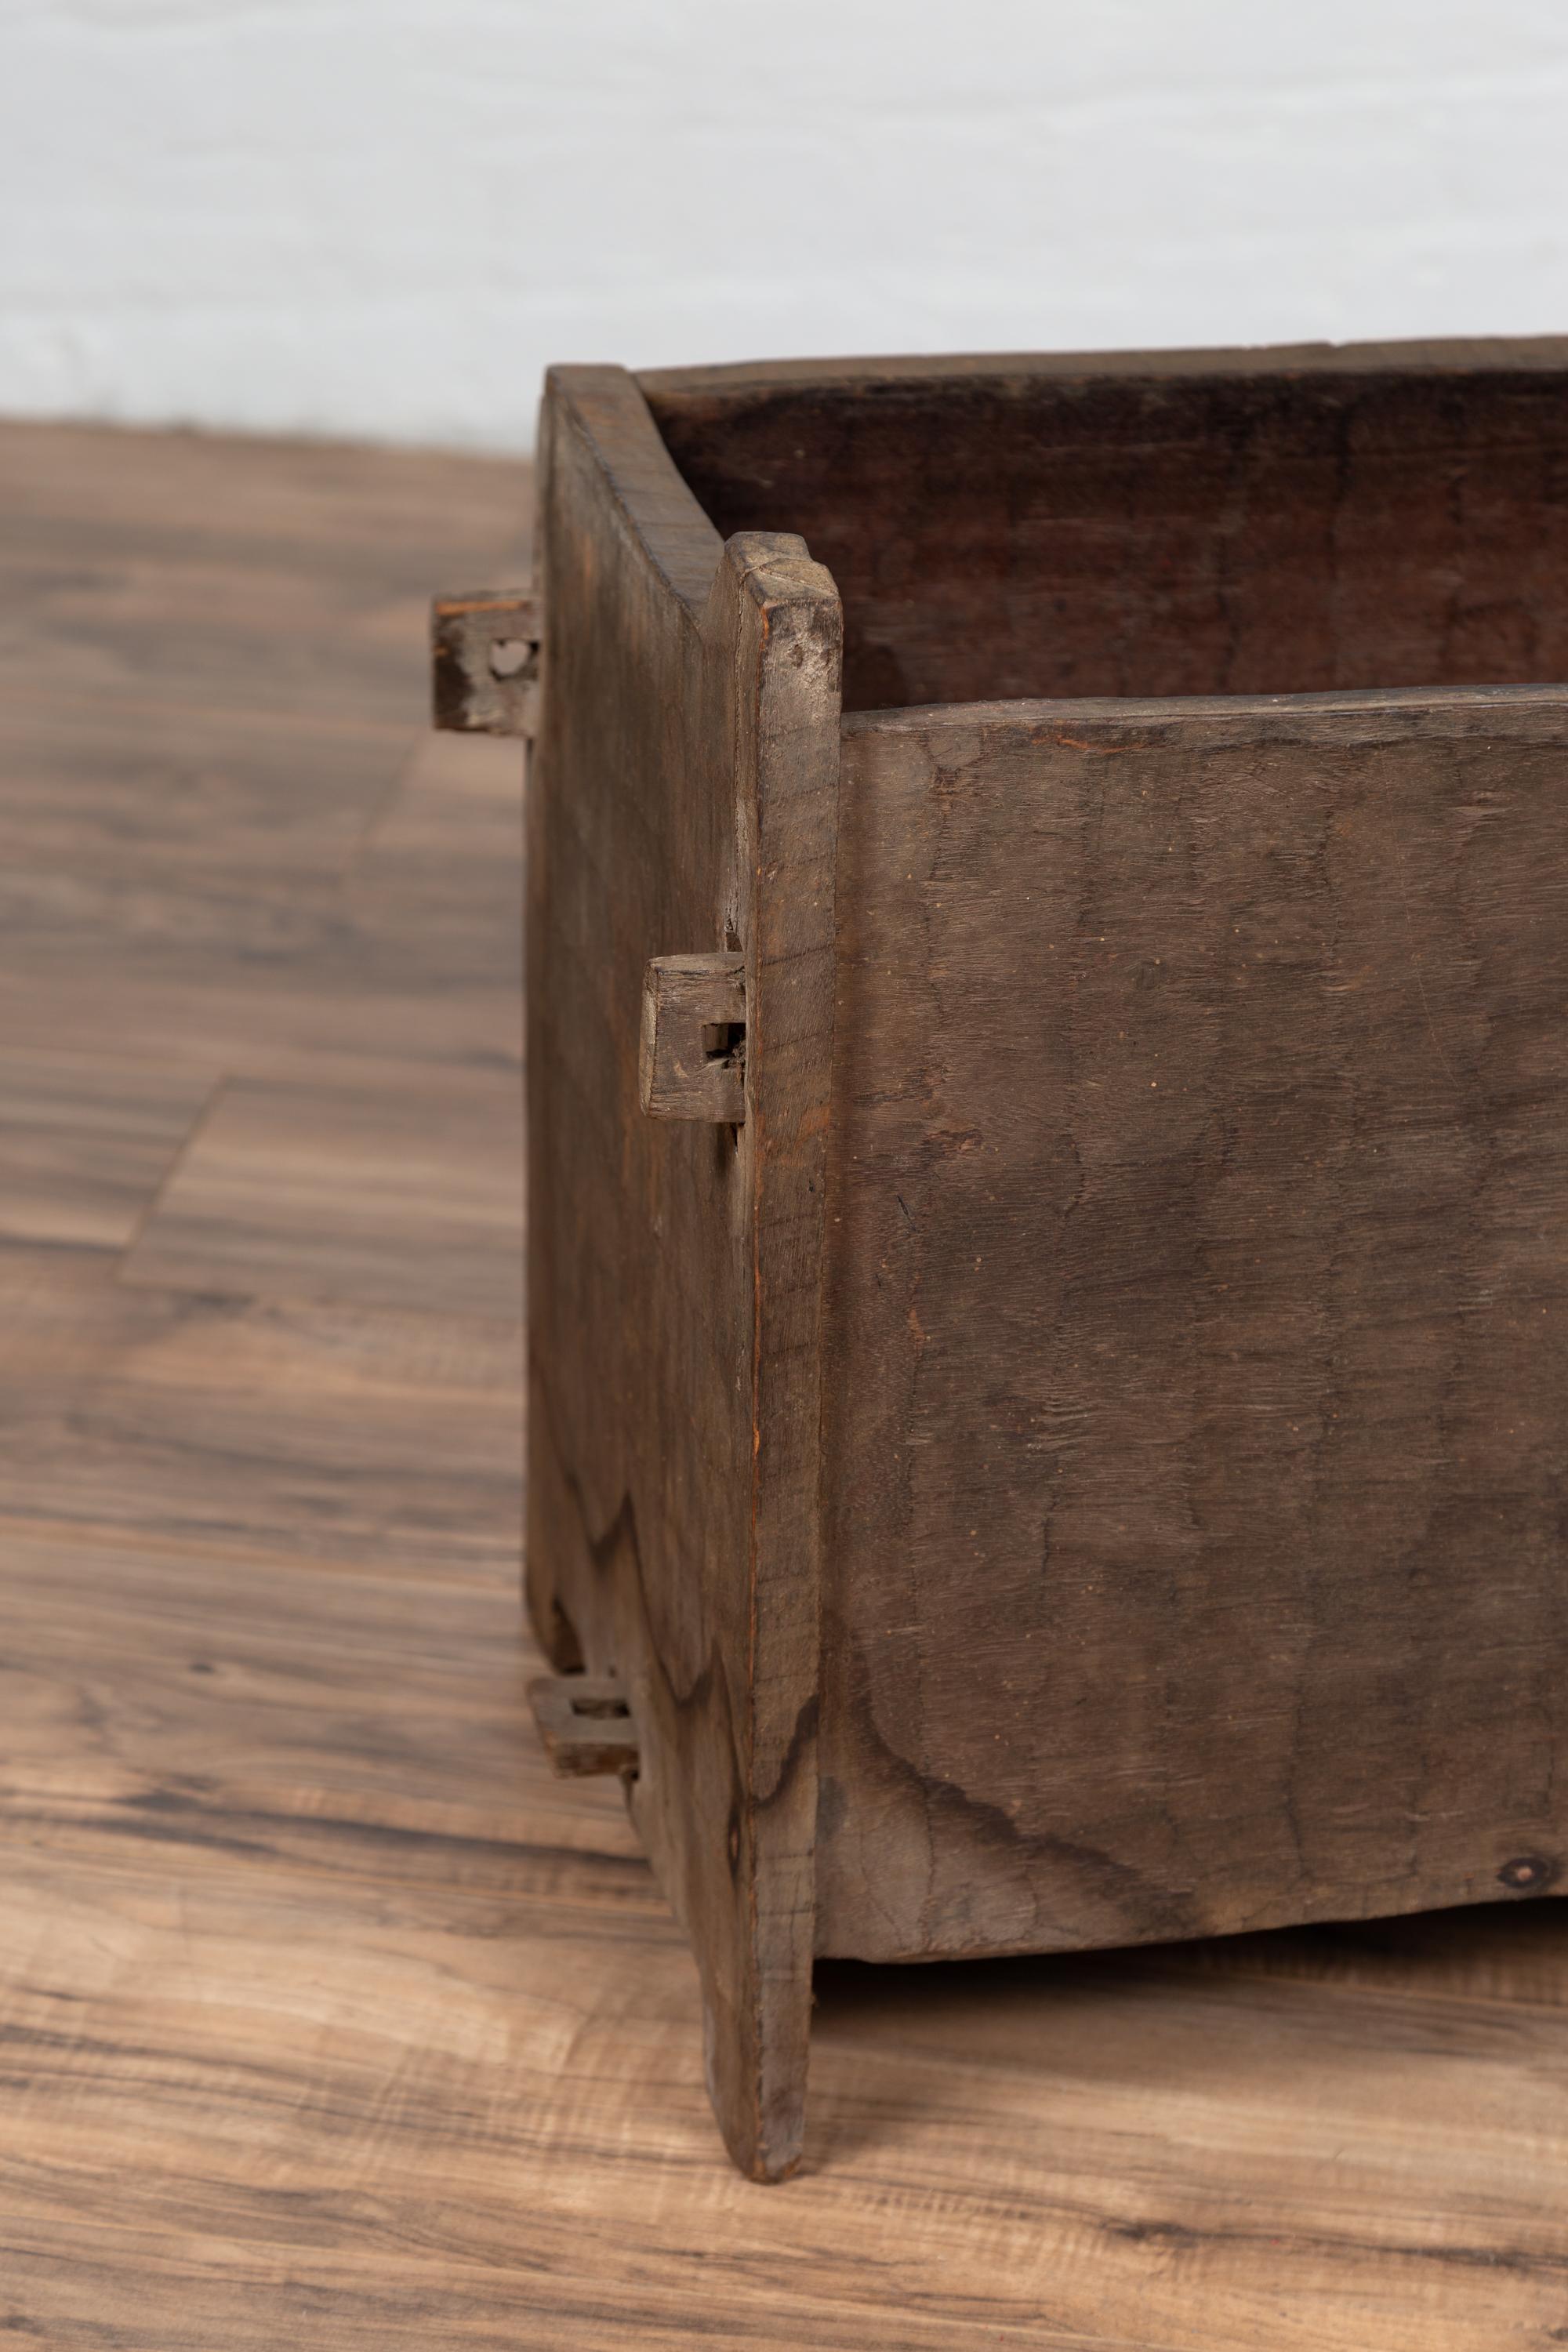 An antique Indian wooden planter box from the early 20th century with nicely weathered appearance. Born in India during the early years of the 20th century, this wooden planter box charms our eyes with its rustic appearance and irregular shape.